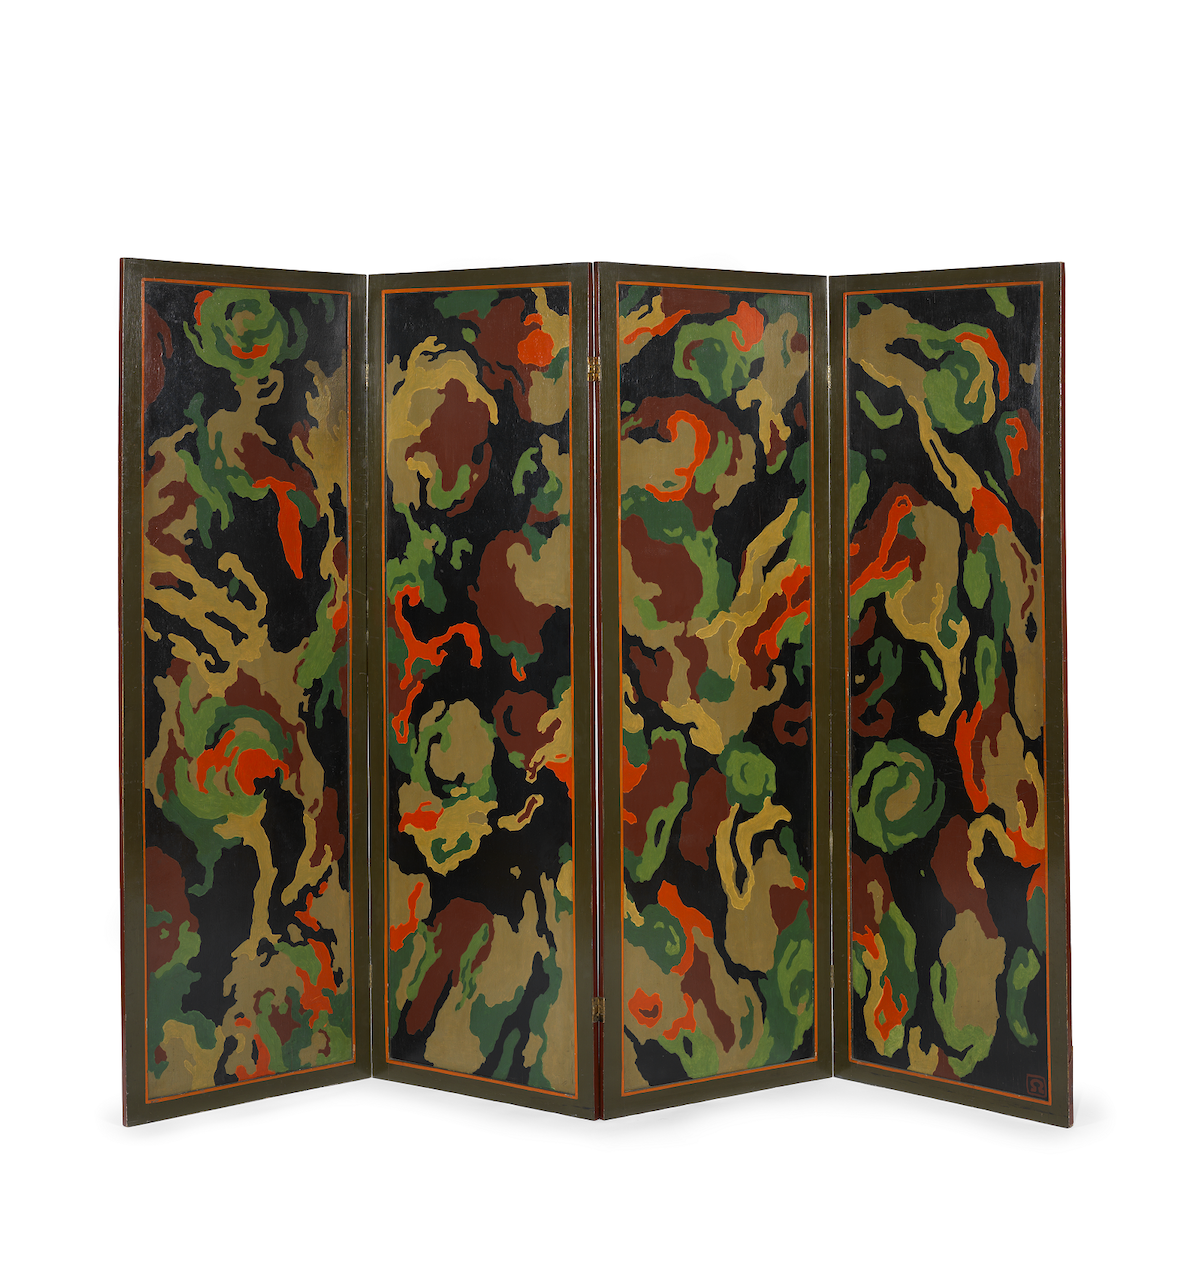 The Wick - Duncan Grant (1885-1978), Four-fold screen with Lily pond design, 1913-14. Estate of Duncan Grant. All rights reserved, DACS 2022. The Courtauld